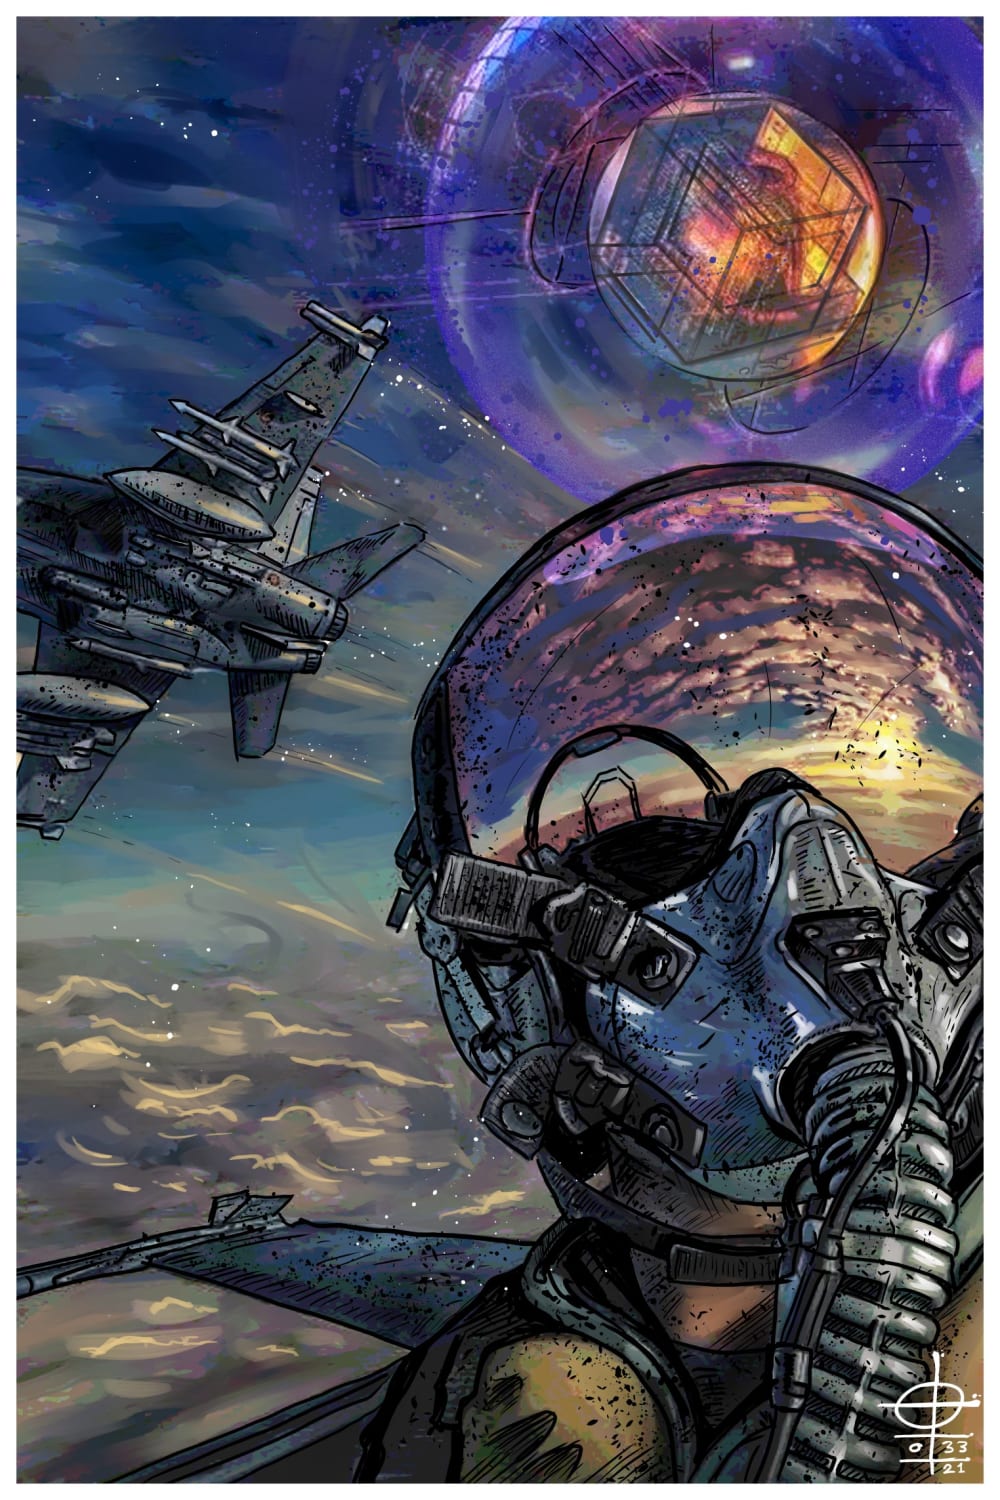 F-18 Super Hornet & Cube within a Sphere UFO / UAP Digital illustration made by me based on original artwork by Nick Madrid depicting the infamous encounter between Lt. Ryan Graves from the USS Theodore D. Roosevelt and the cube inside a sphere UFO/UAP that took place between 2014-2015